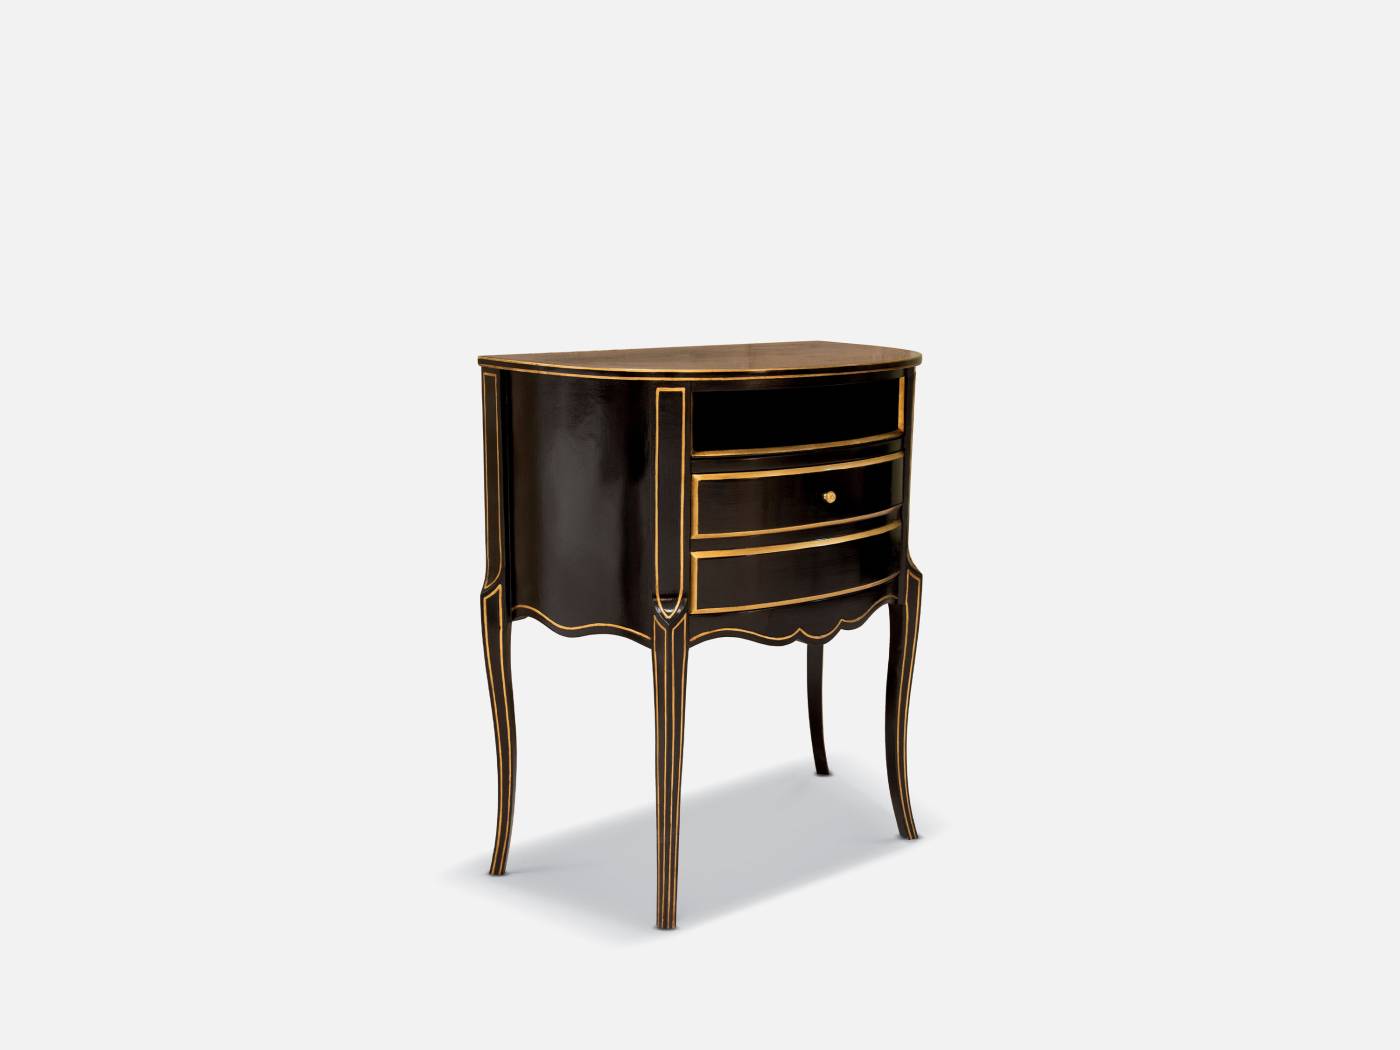 ART. 2223 – Discover the elegance of luxury classic Bedside tables made in Italy by C.G. Capelletti. Luxury classic furniture that combines style and craftsmanship.